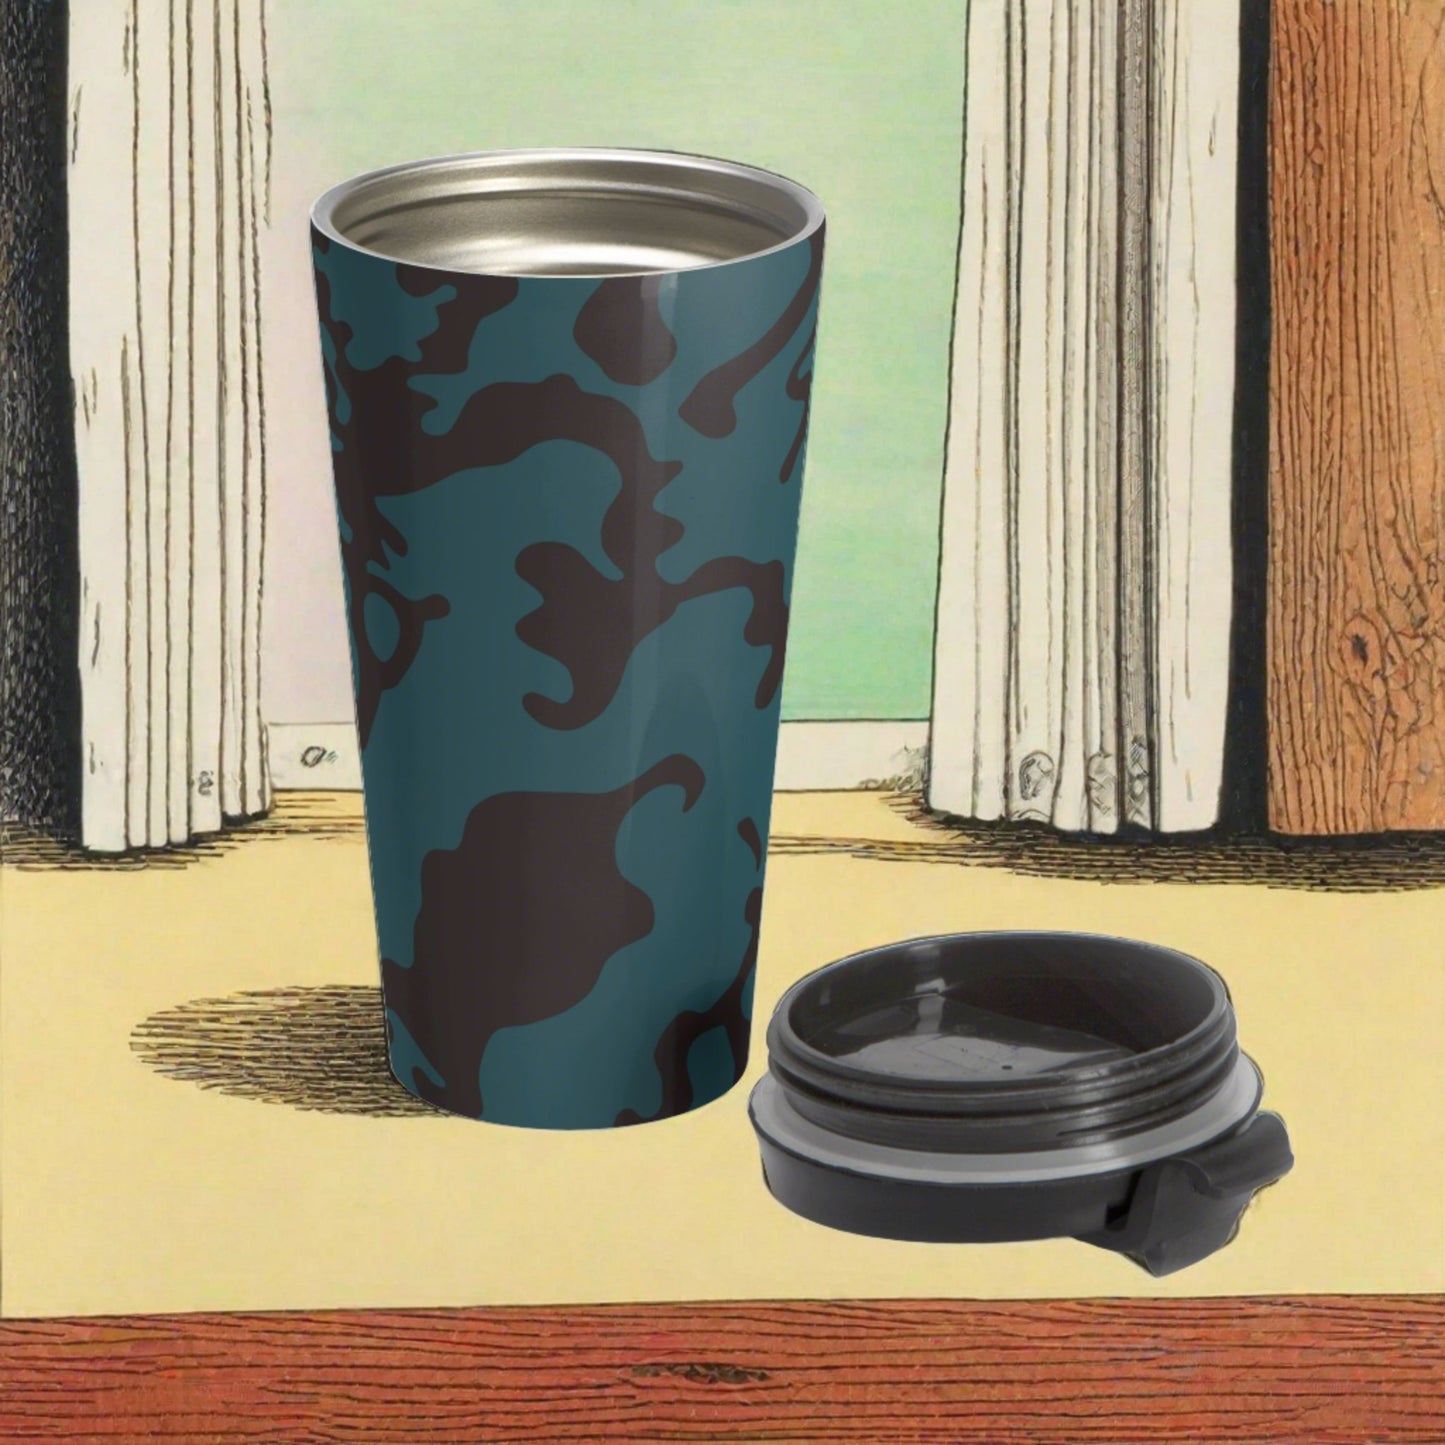 Stainless Steel Travel Mug With Cup 15oz (440ml) | Camouflage Turquoise & Brown Design